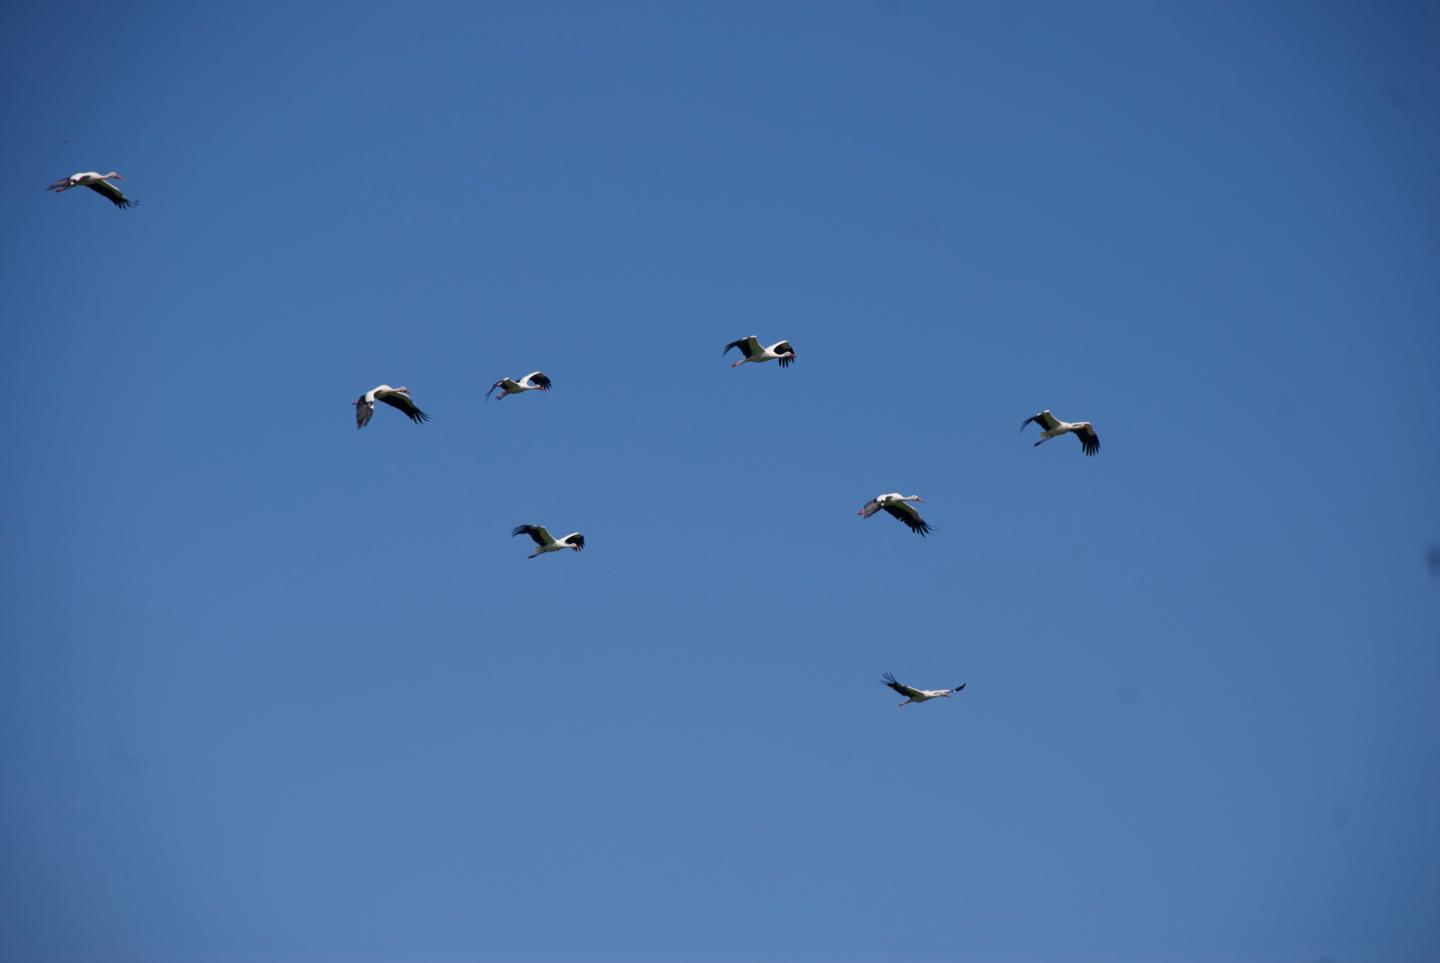 Birds at the Head of a Flock Are the More Efficient, Tactical Fliers (1 of 1)